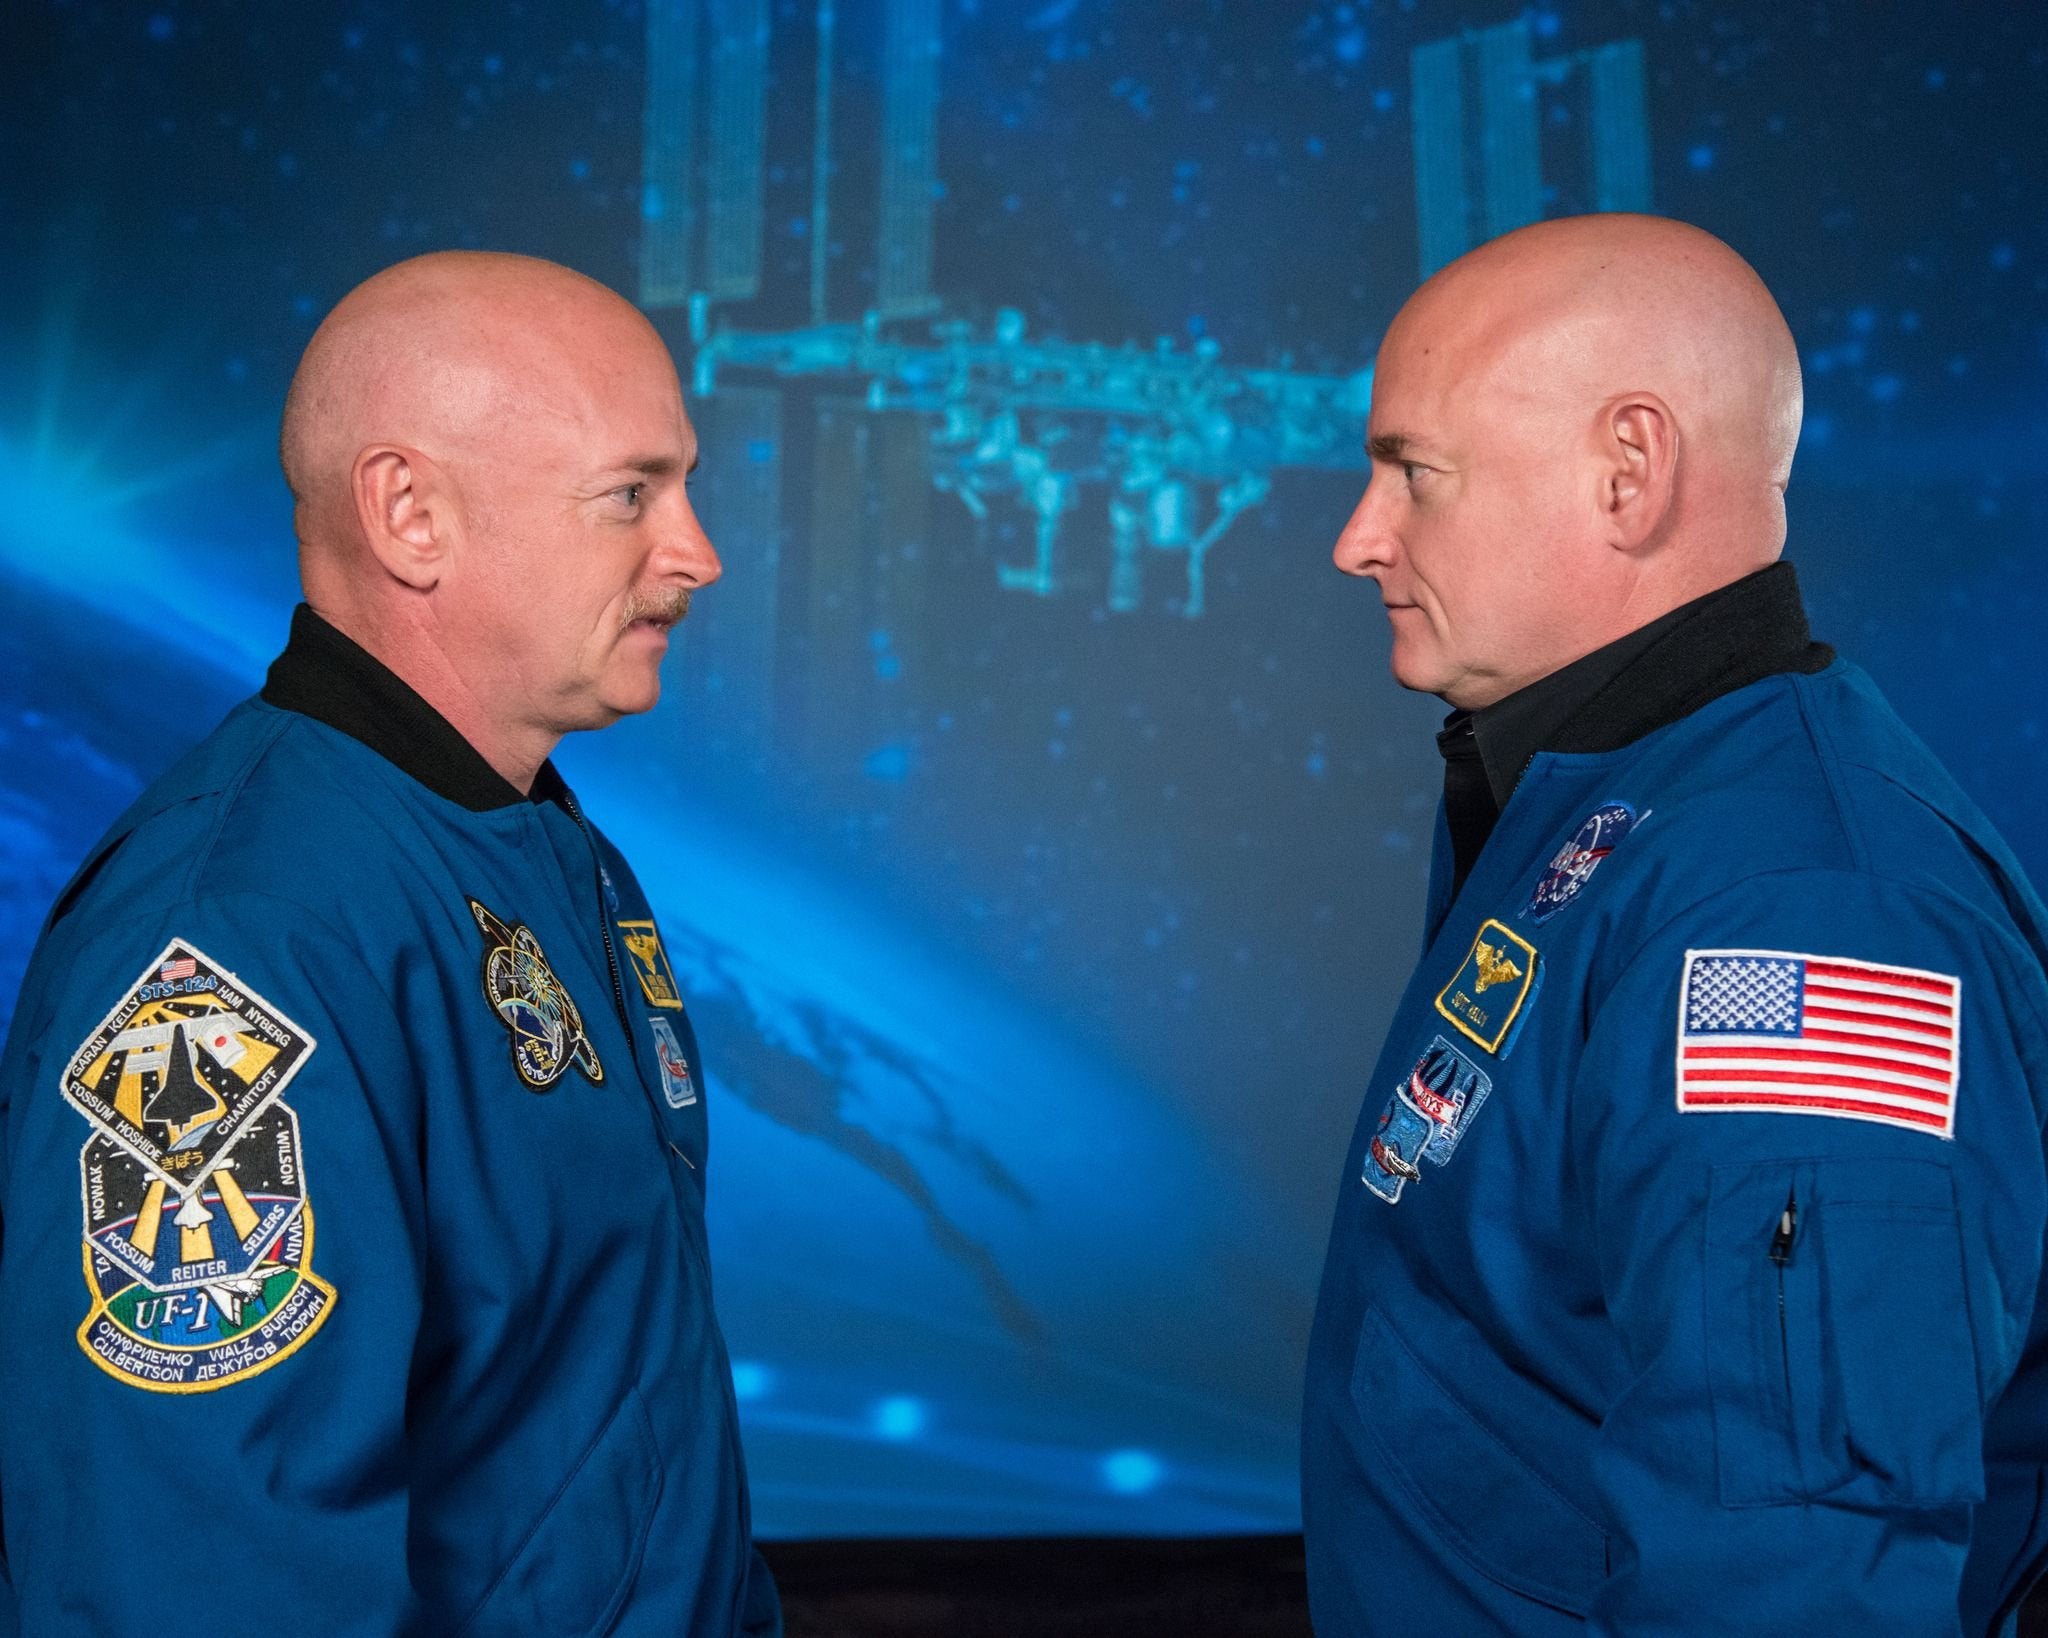 From left: Mark Kelly and his twin Nasa astronaut Scott Kelly, who participated in the Twins Study